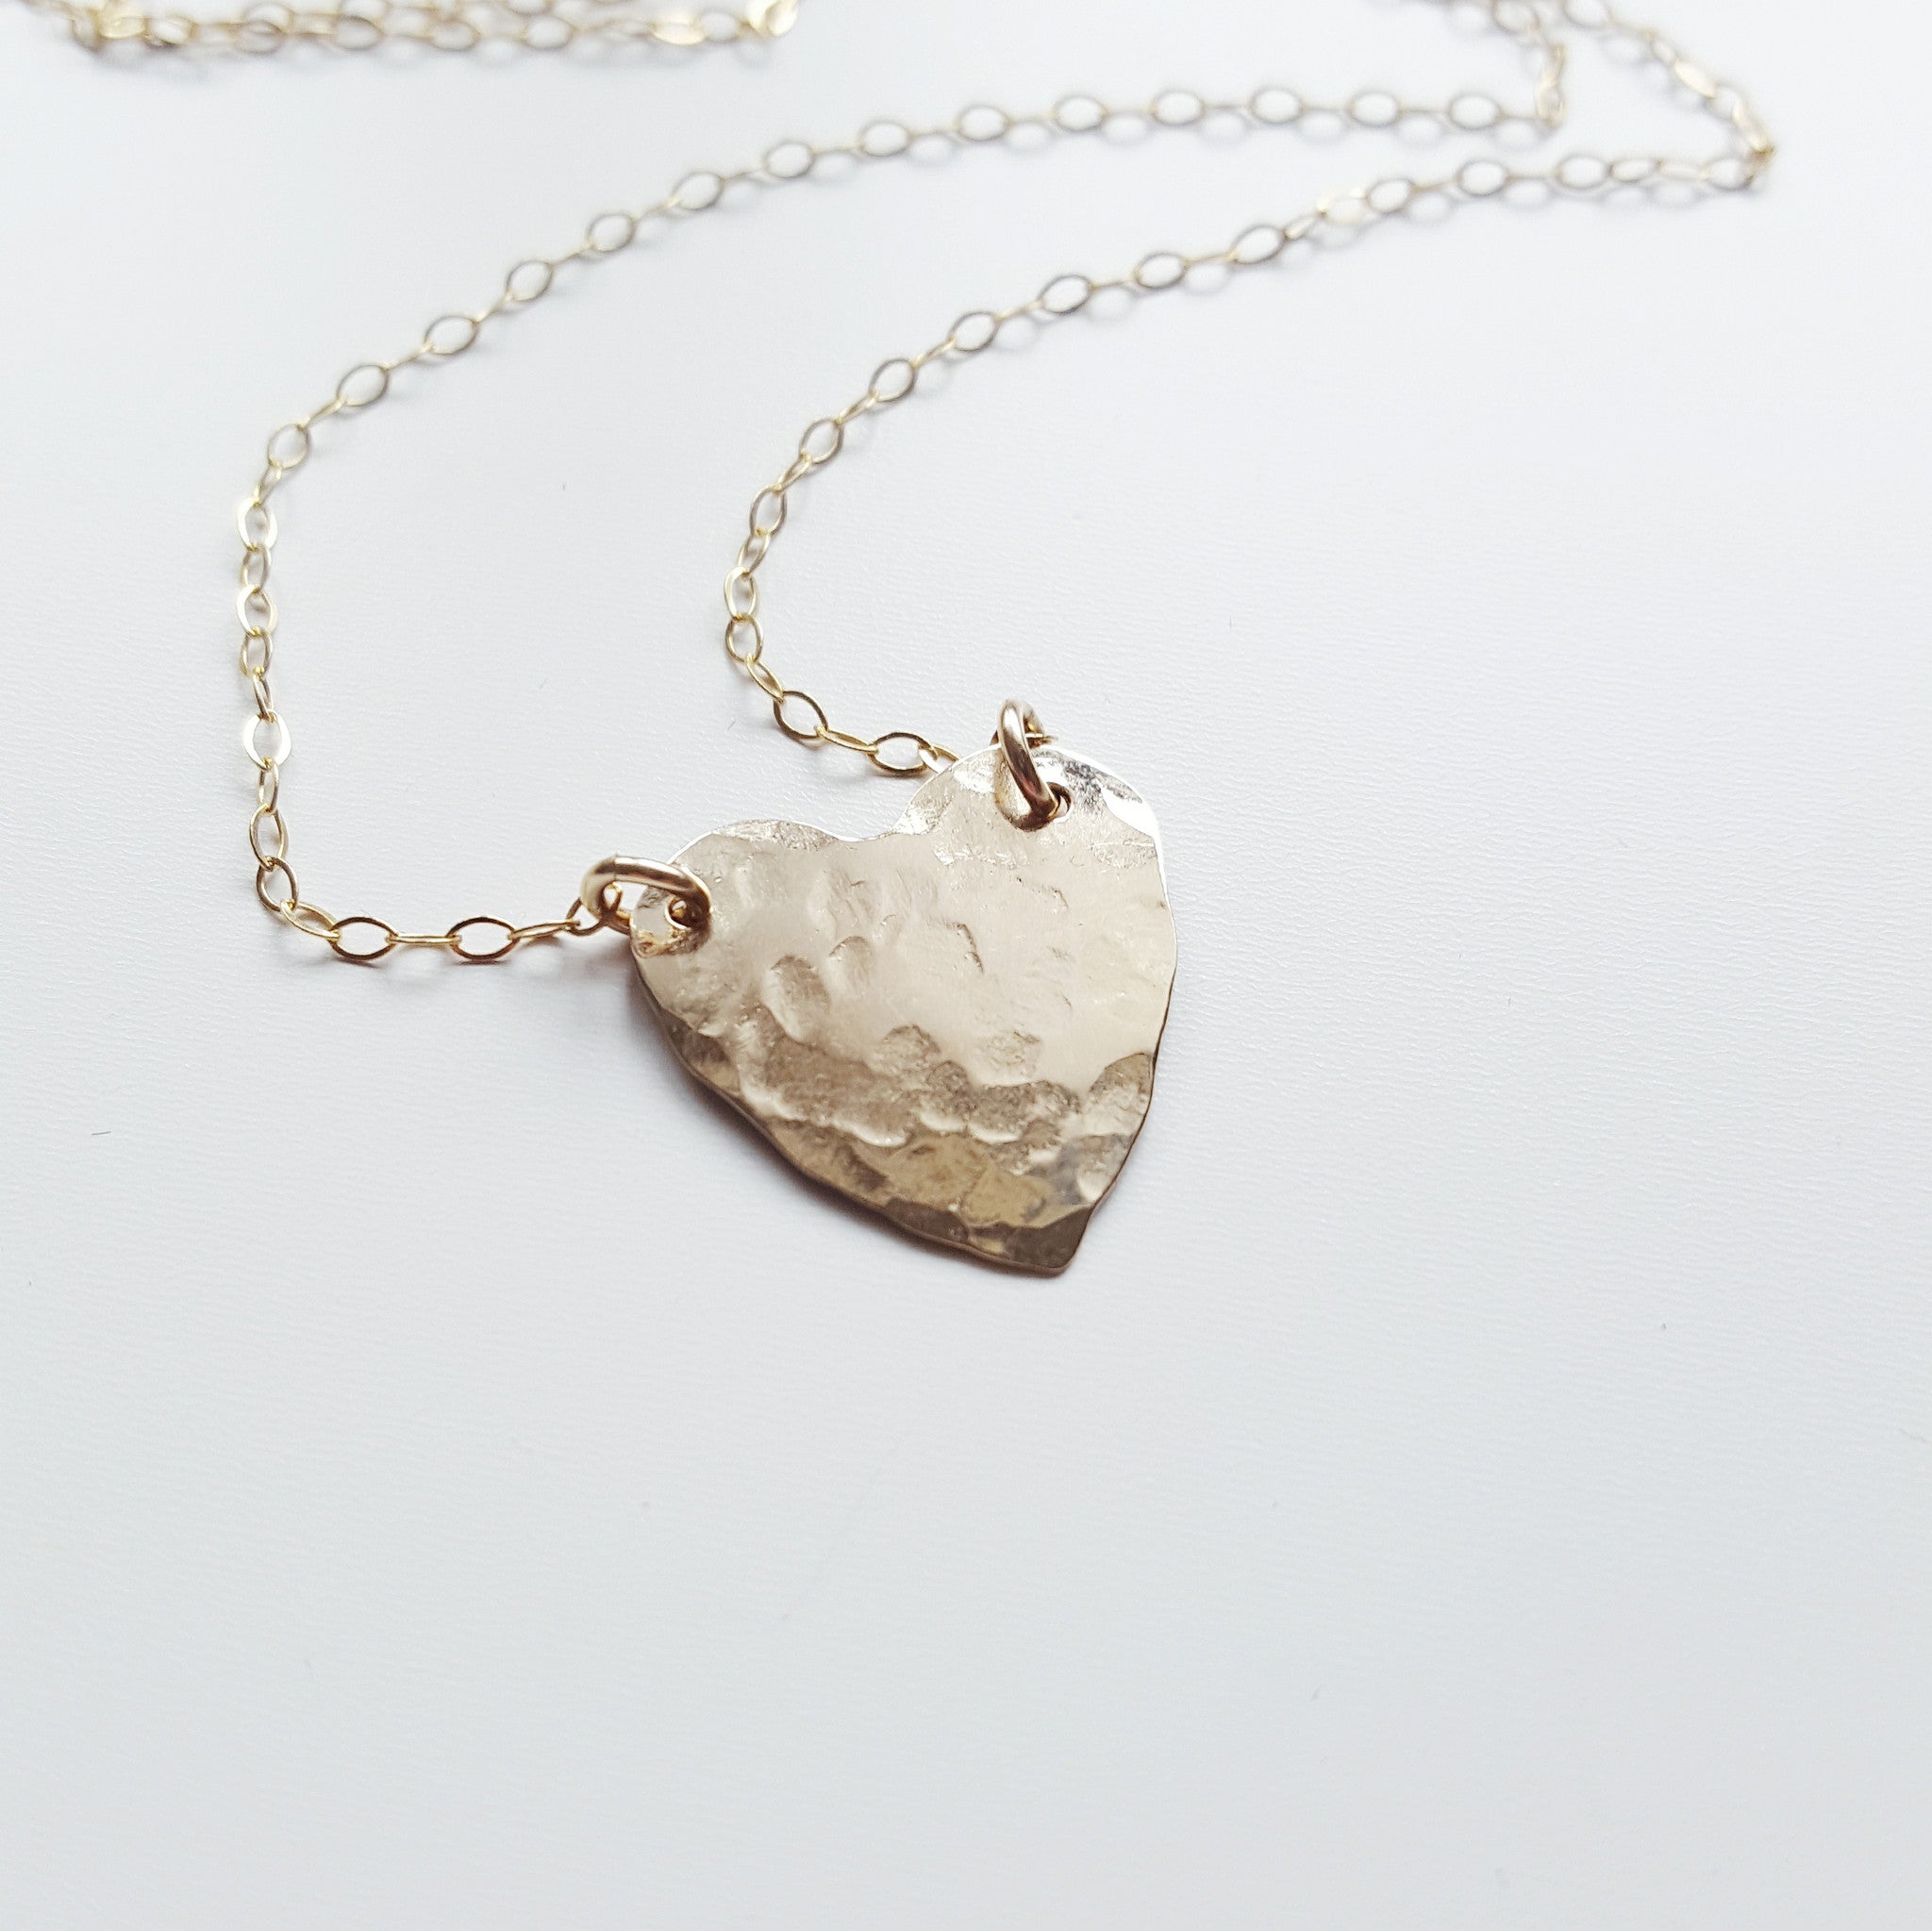 bronze hammered heart necklace with chain